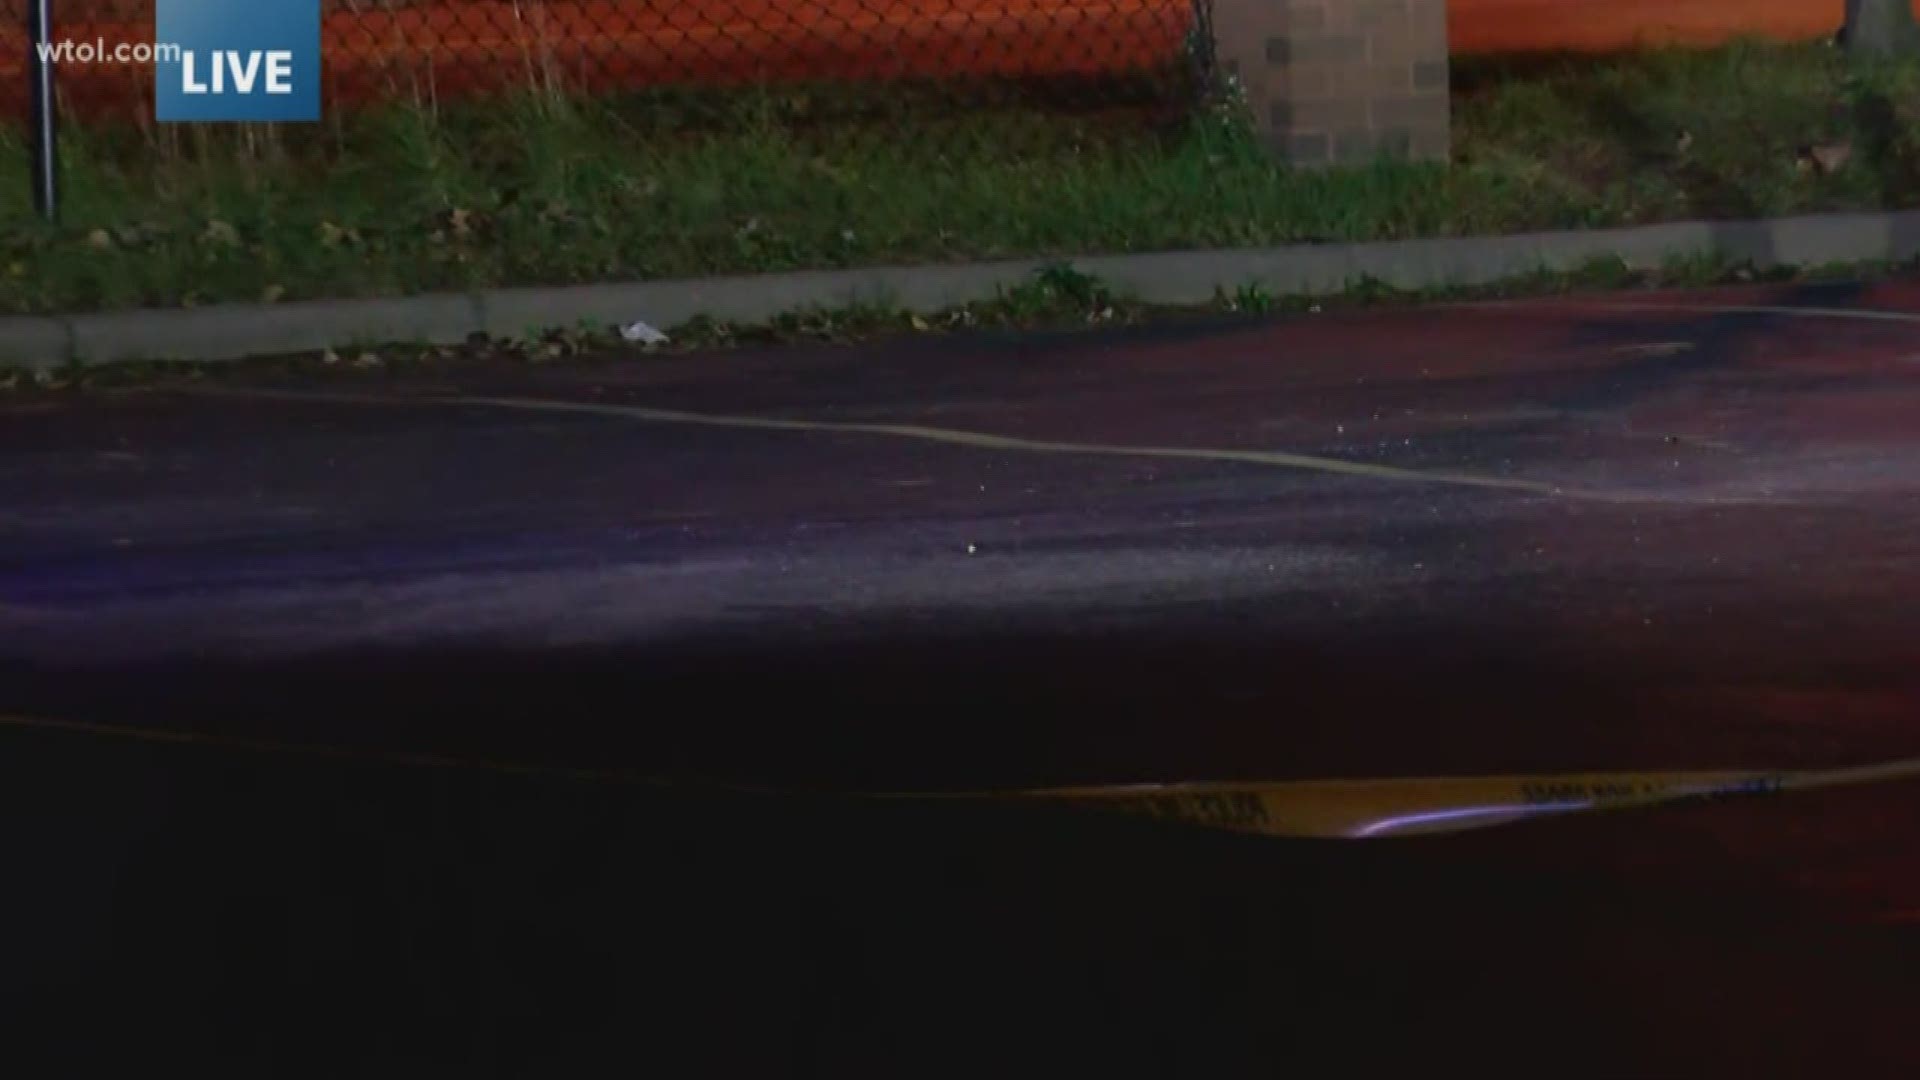 Police say the man was shot near the Seaway grocery store.